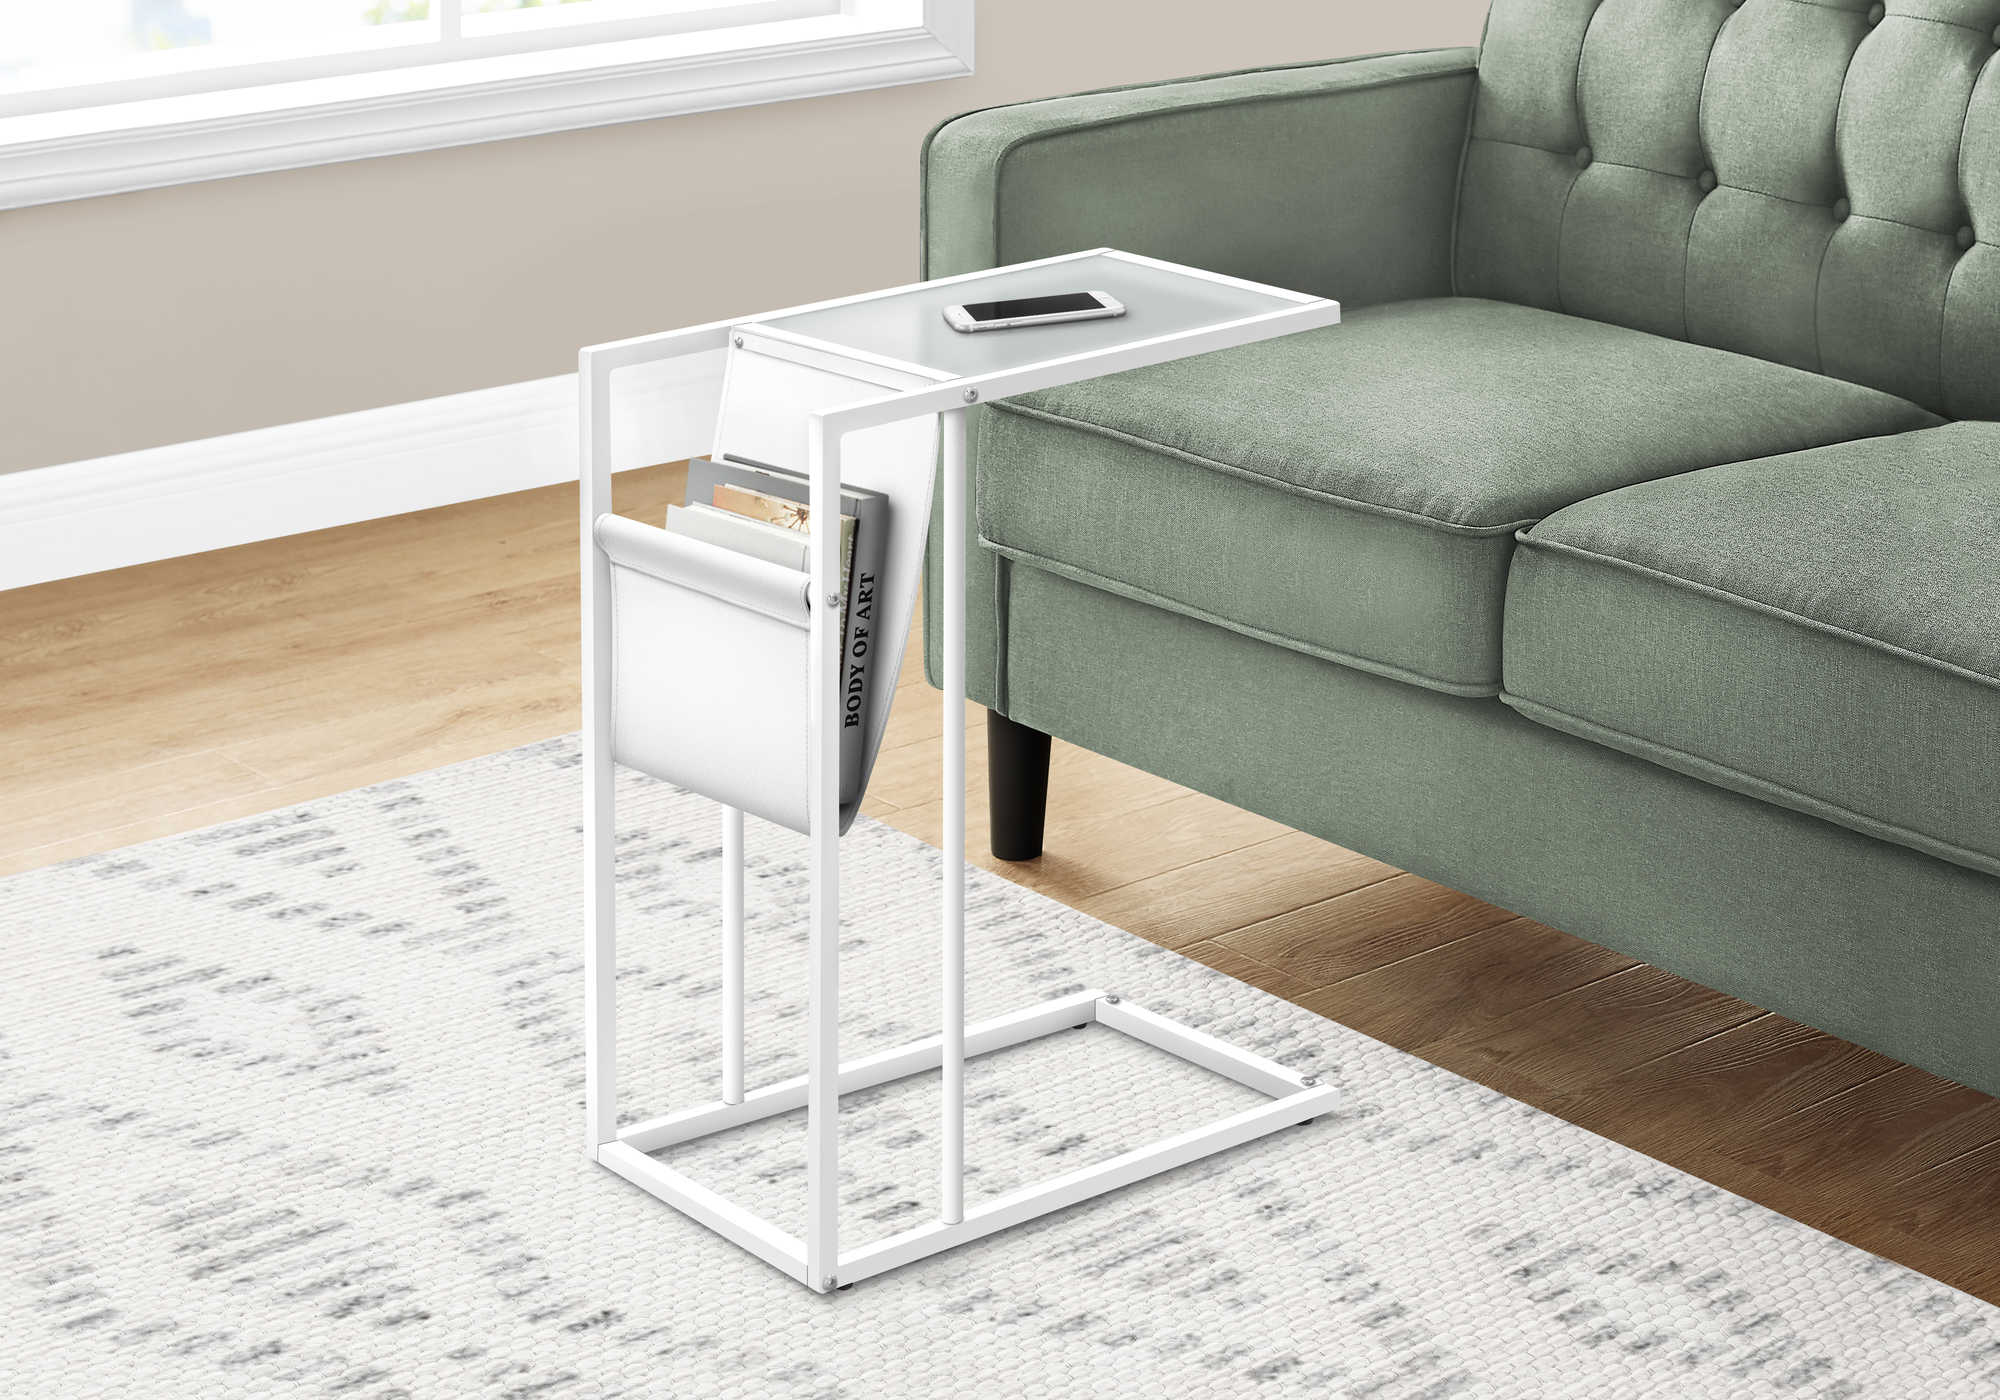 ACCENT TABLE - WHITE / WHITE METAL WITH A MAGAZINE RACK